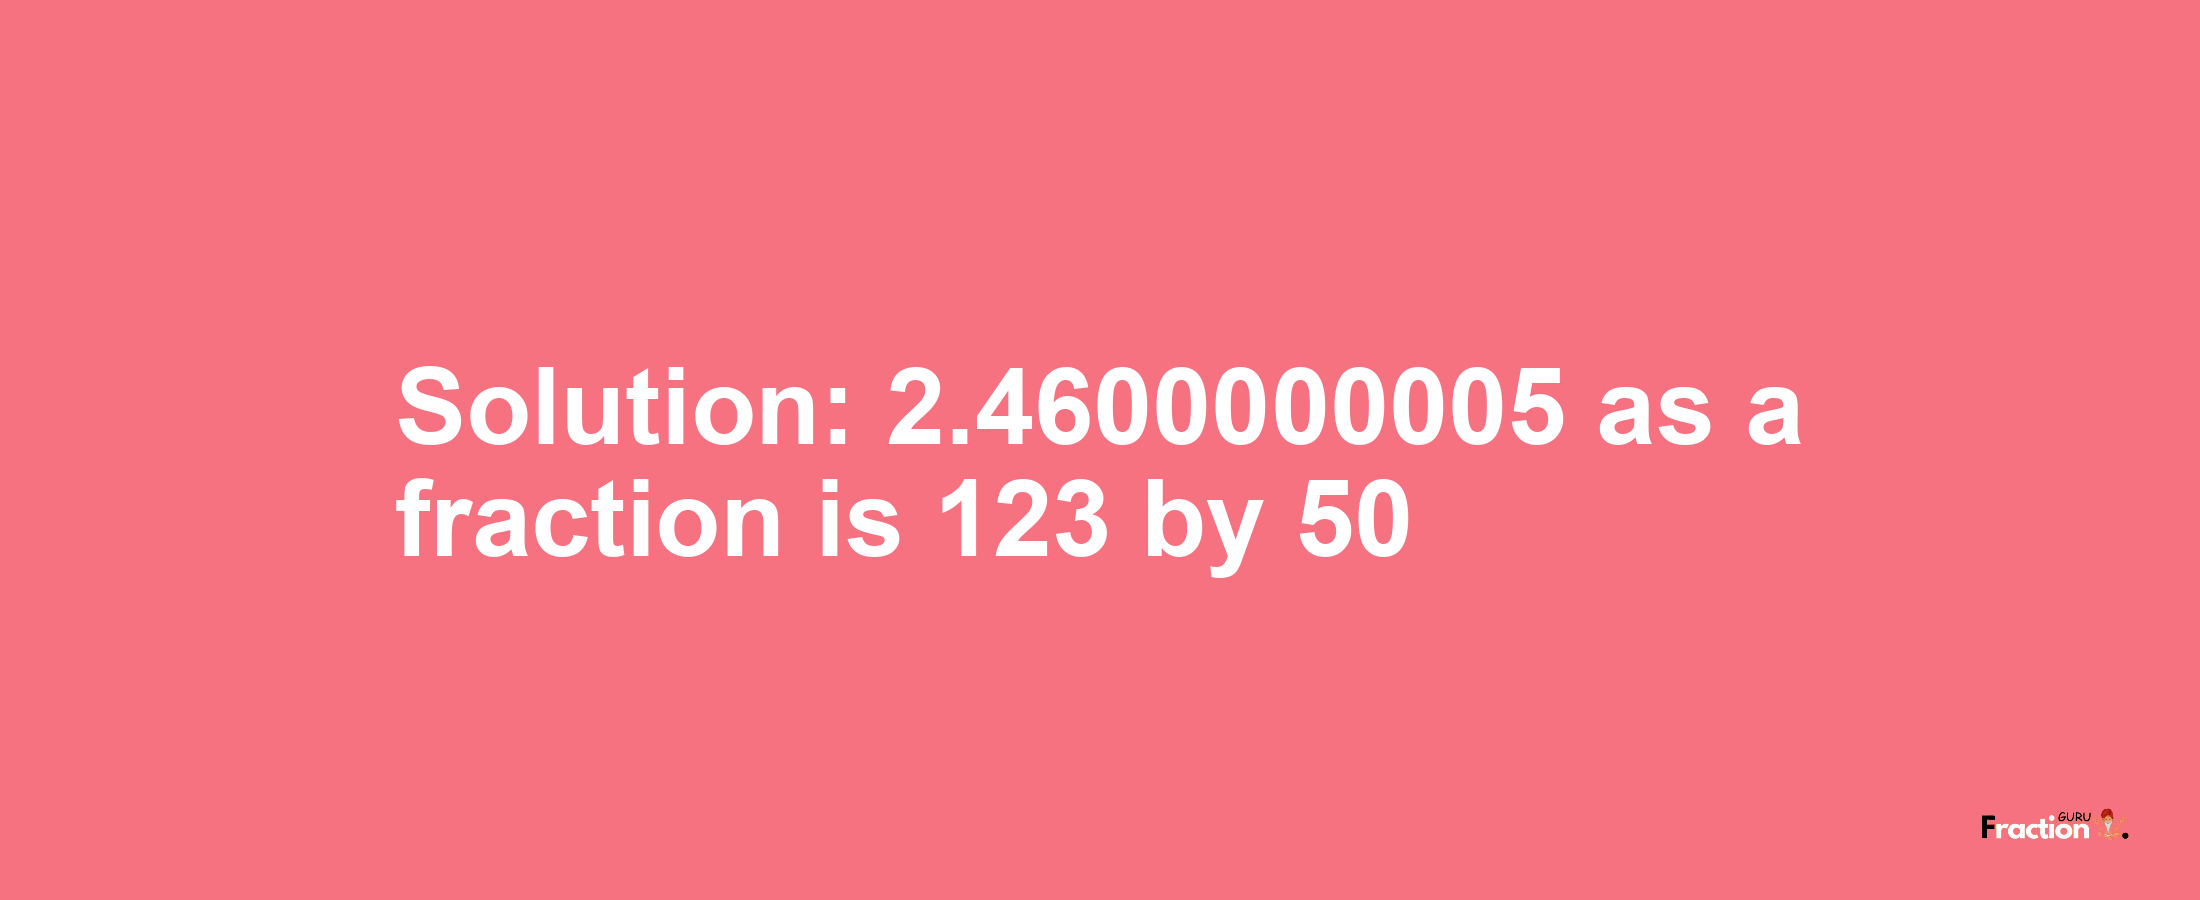 Solution:2.4600000005 as a fraction is 123/50